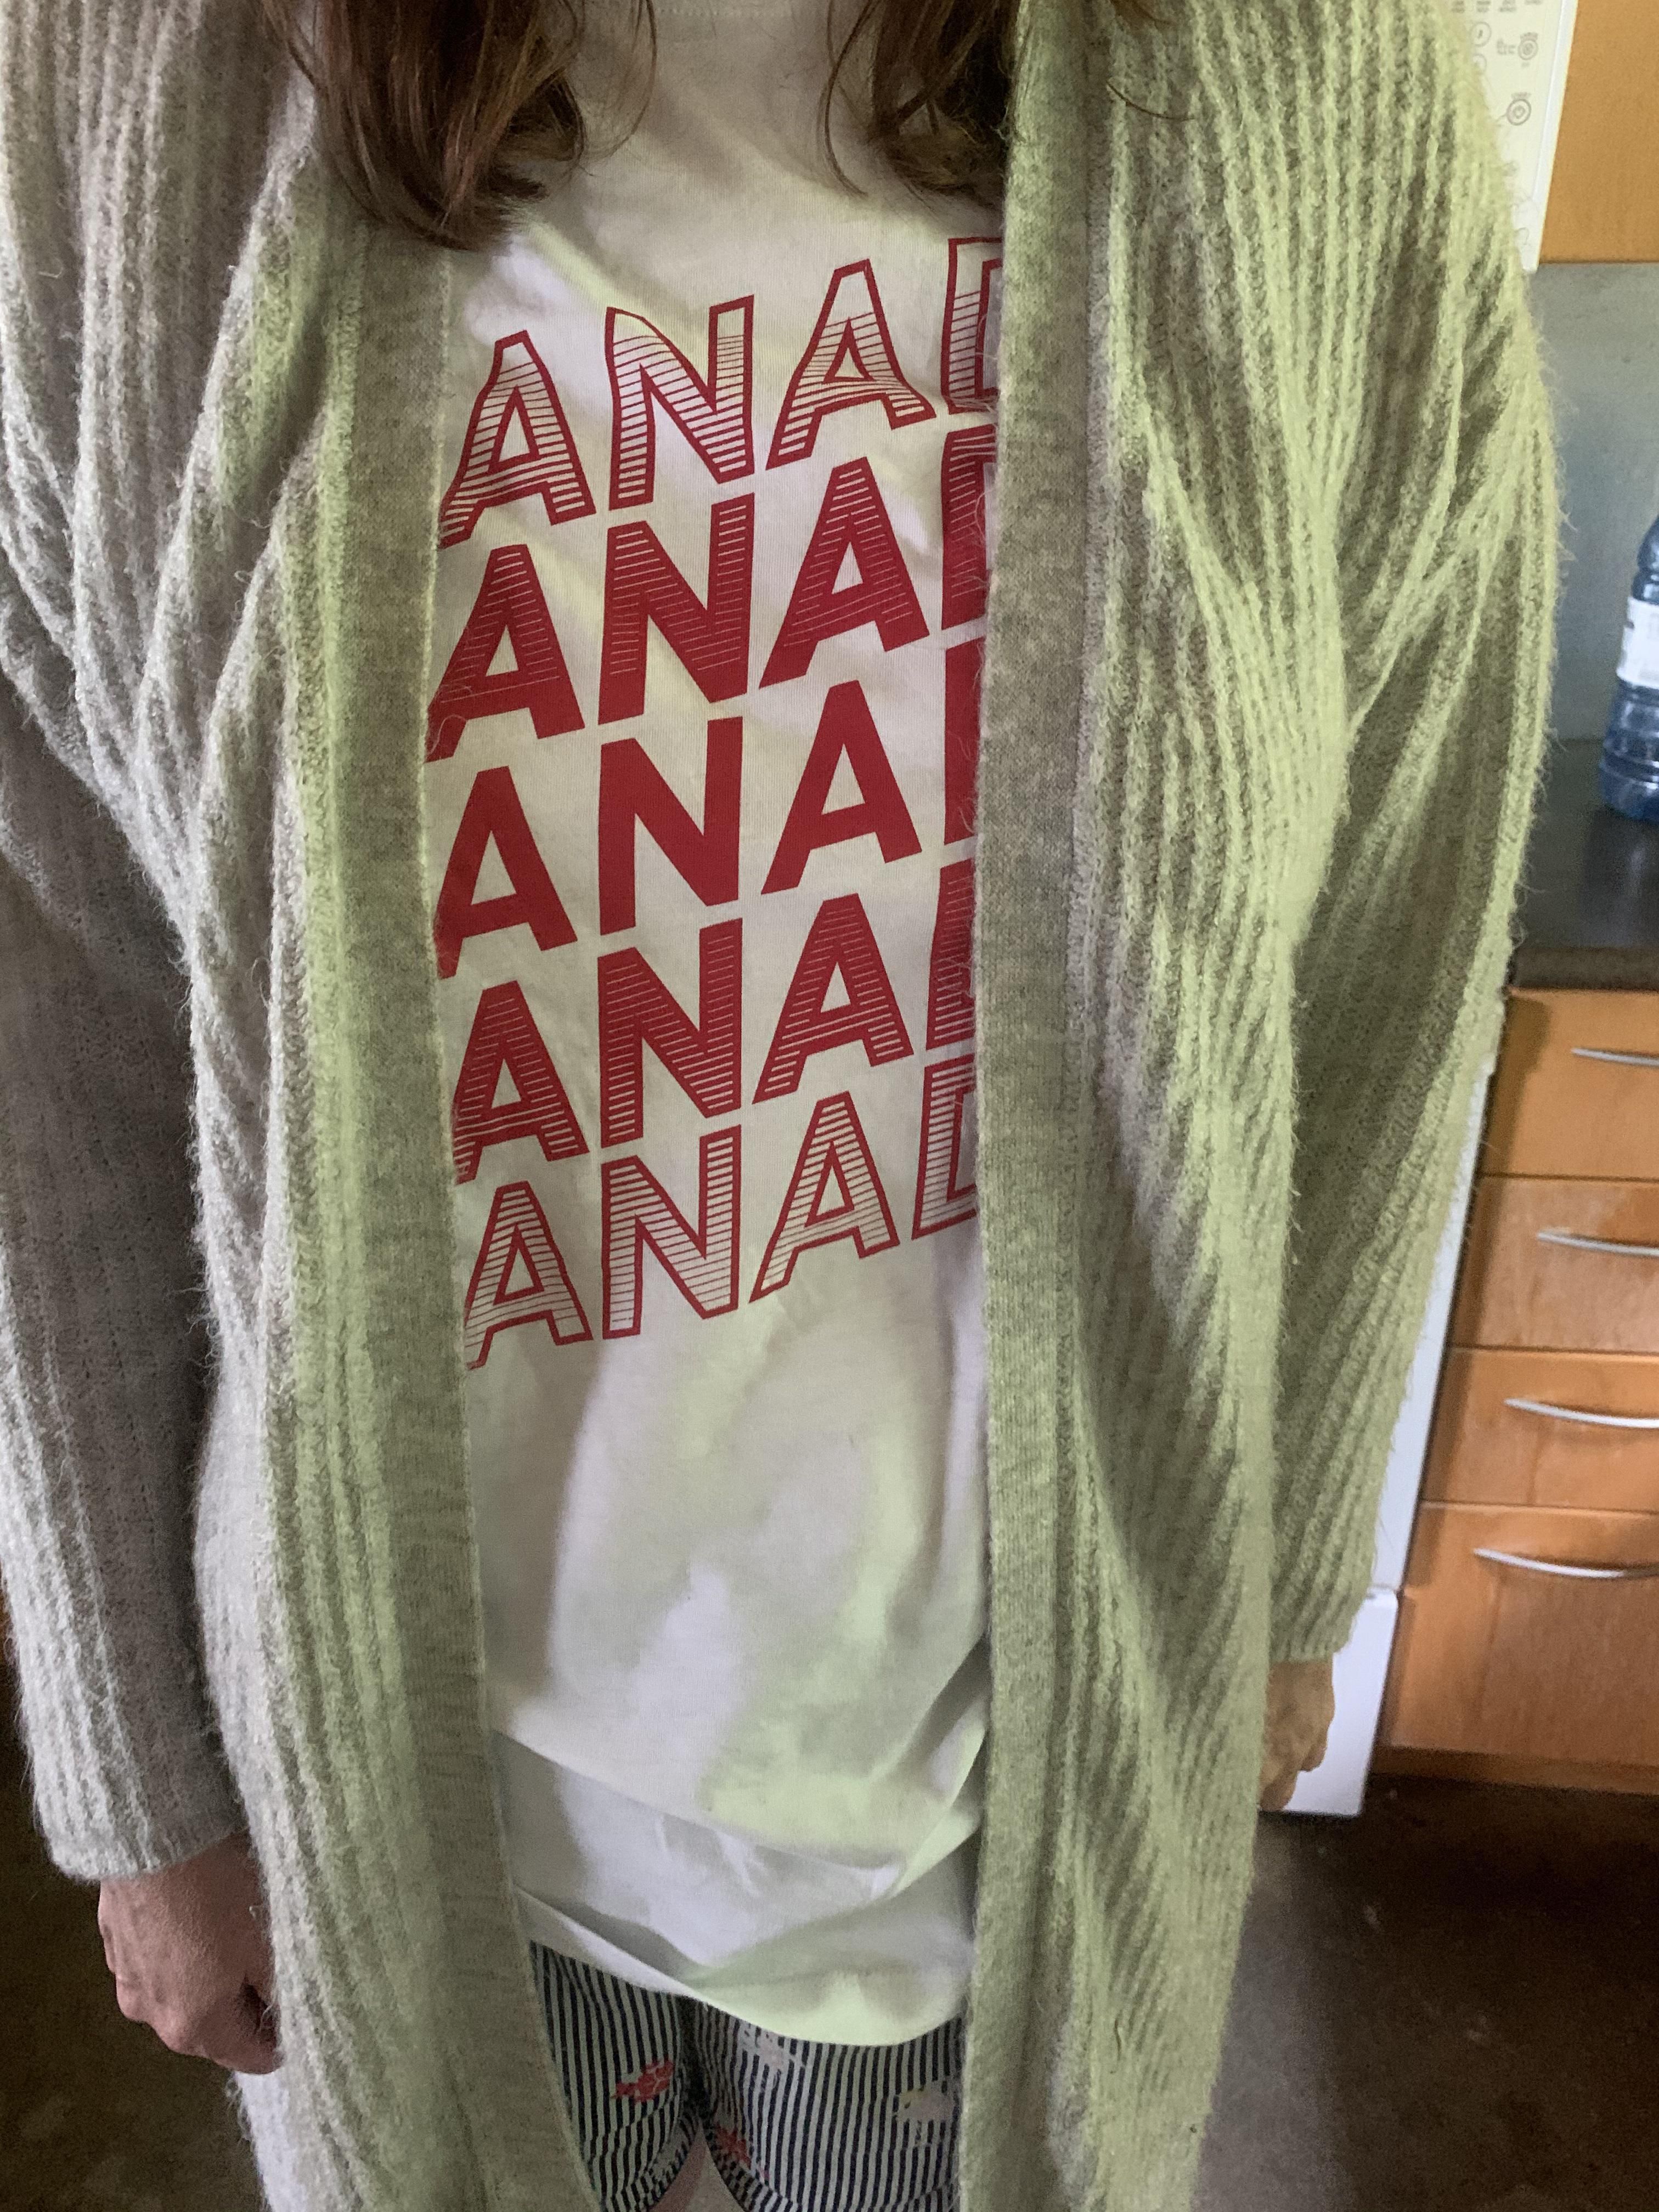 I told my wife she should not wear a sweater with her Canada Day shirt